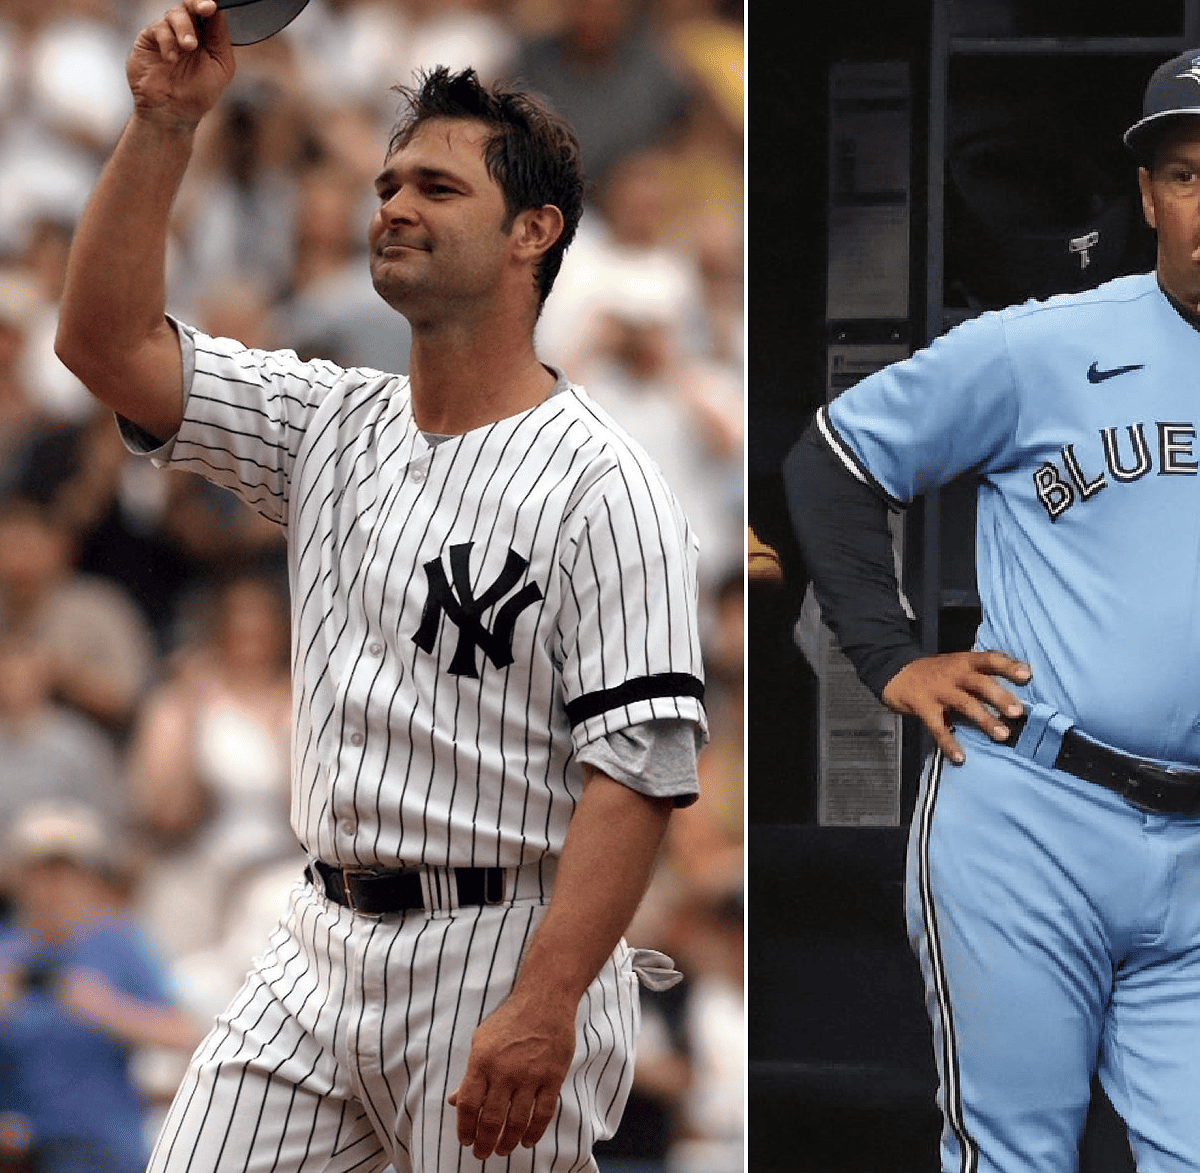 Why Don Mattingly Picked Toronto Over Old Team Yankees